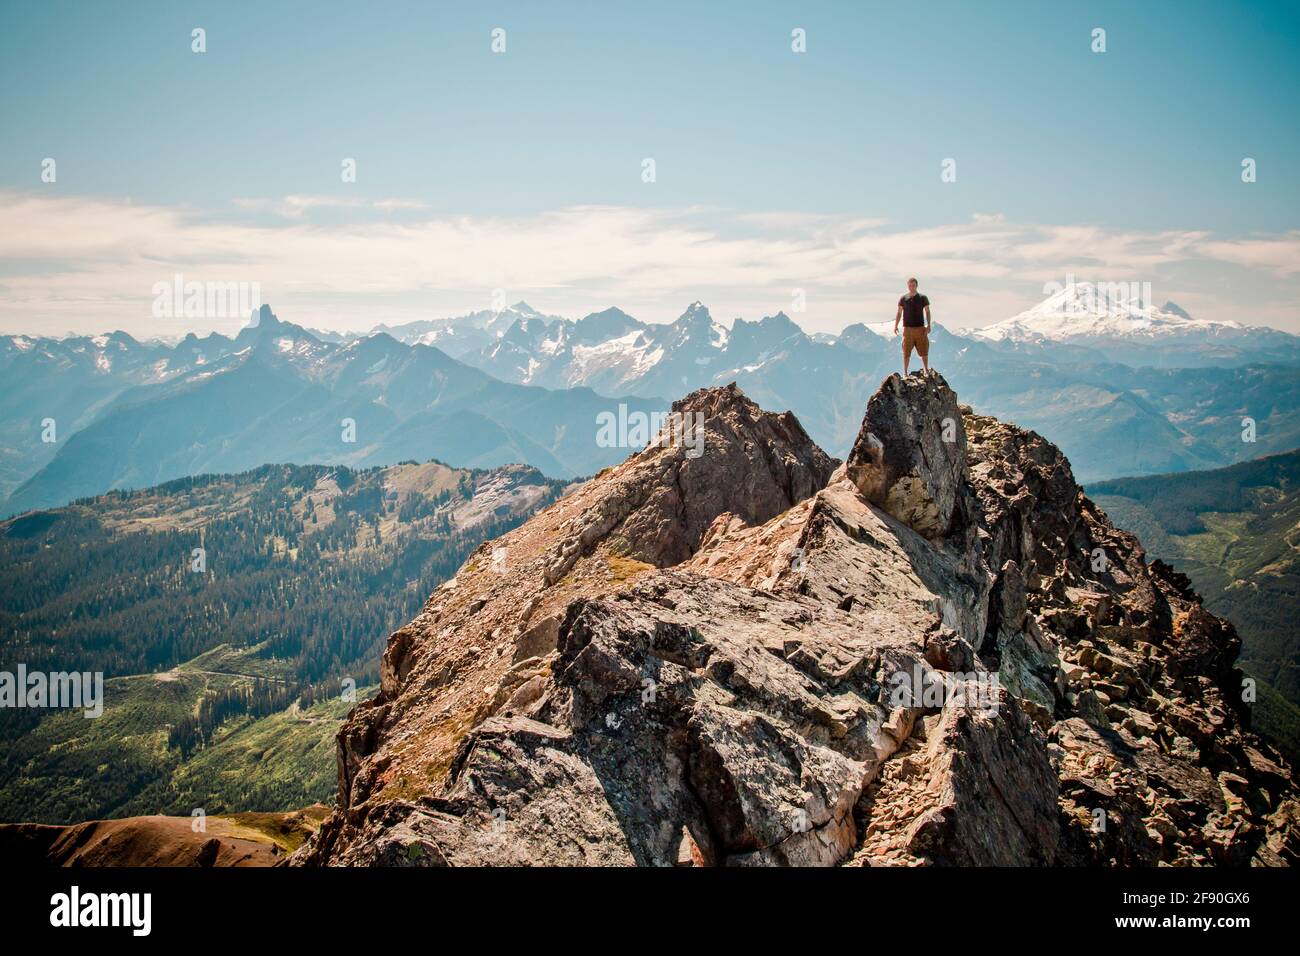 Hiker stands on summit of mountain with scenic view behind. Stock Photo